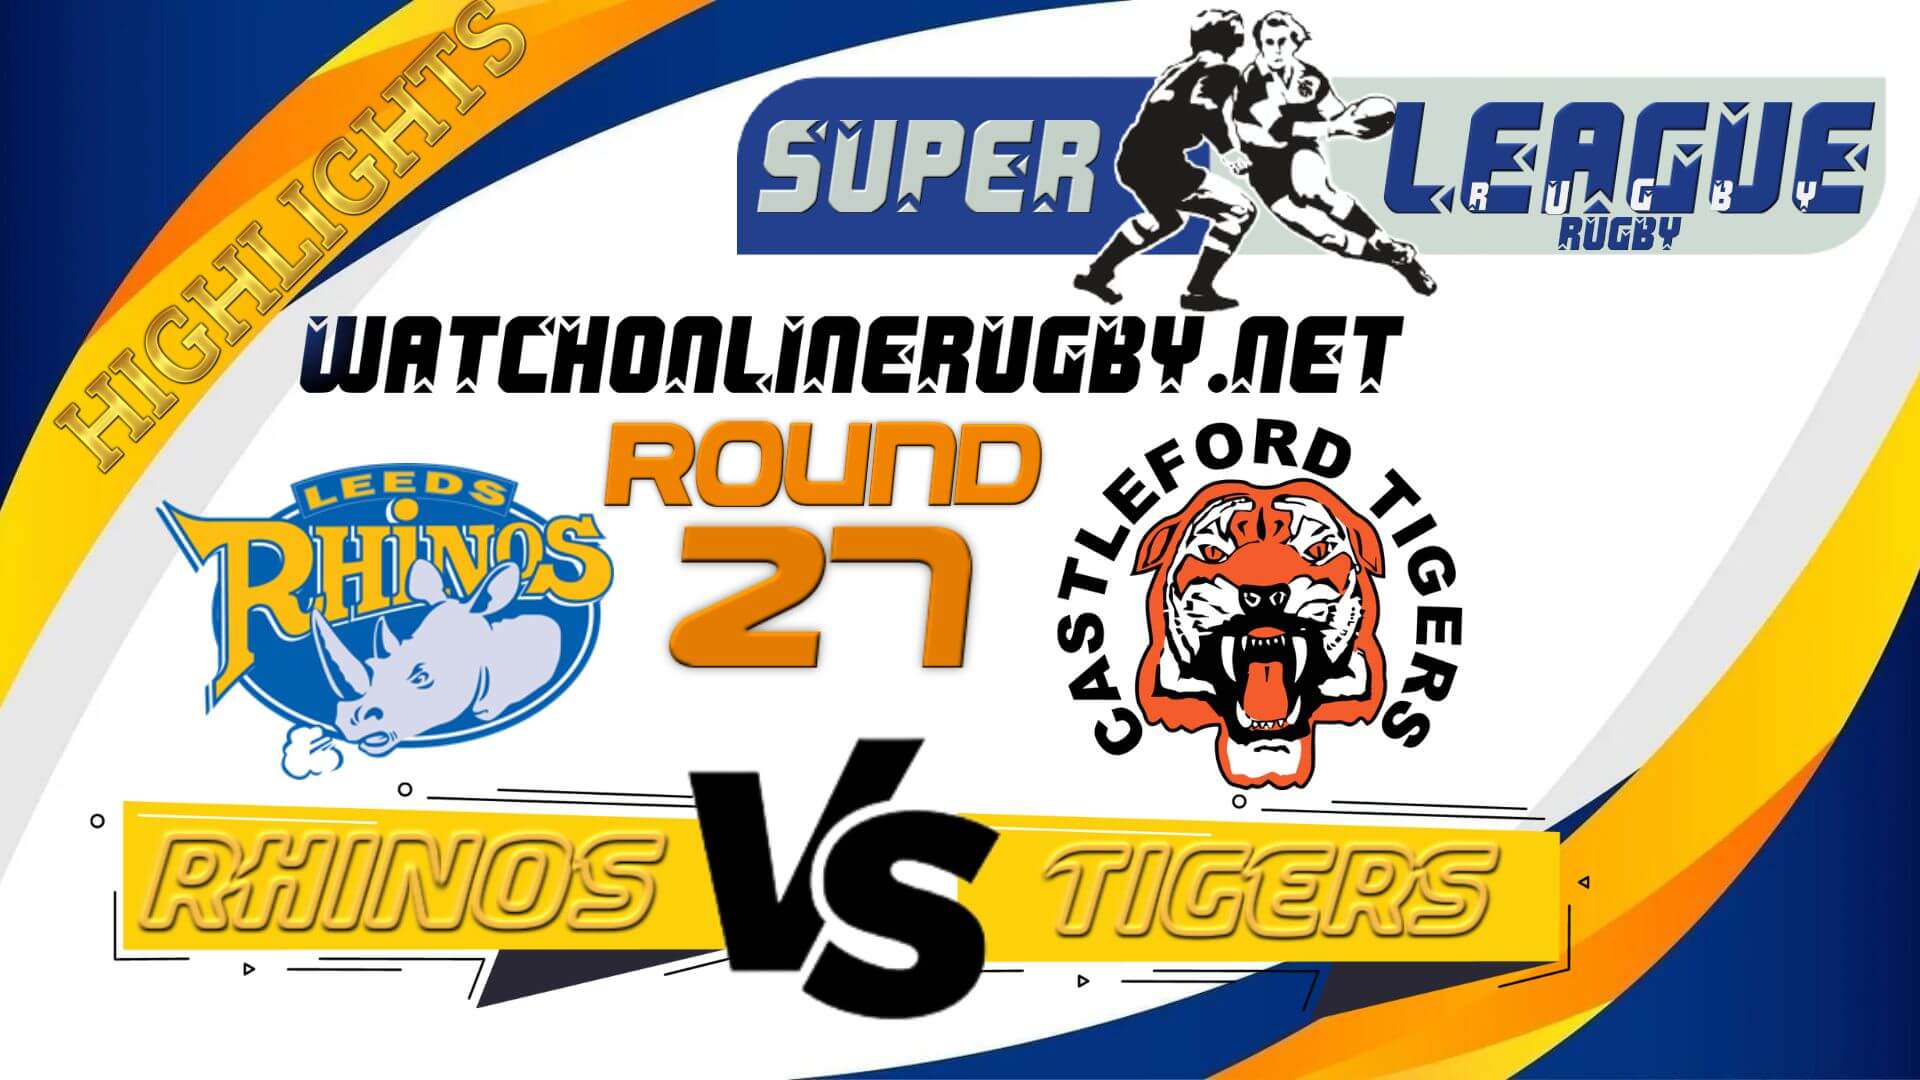 Leeds Rhinos Vs Castleford Tigers Super League Rugby 2022 RD 27